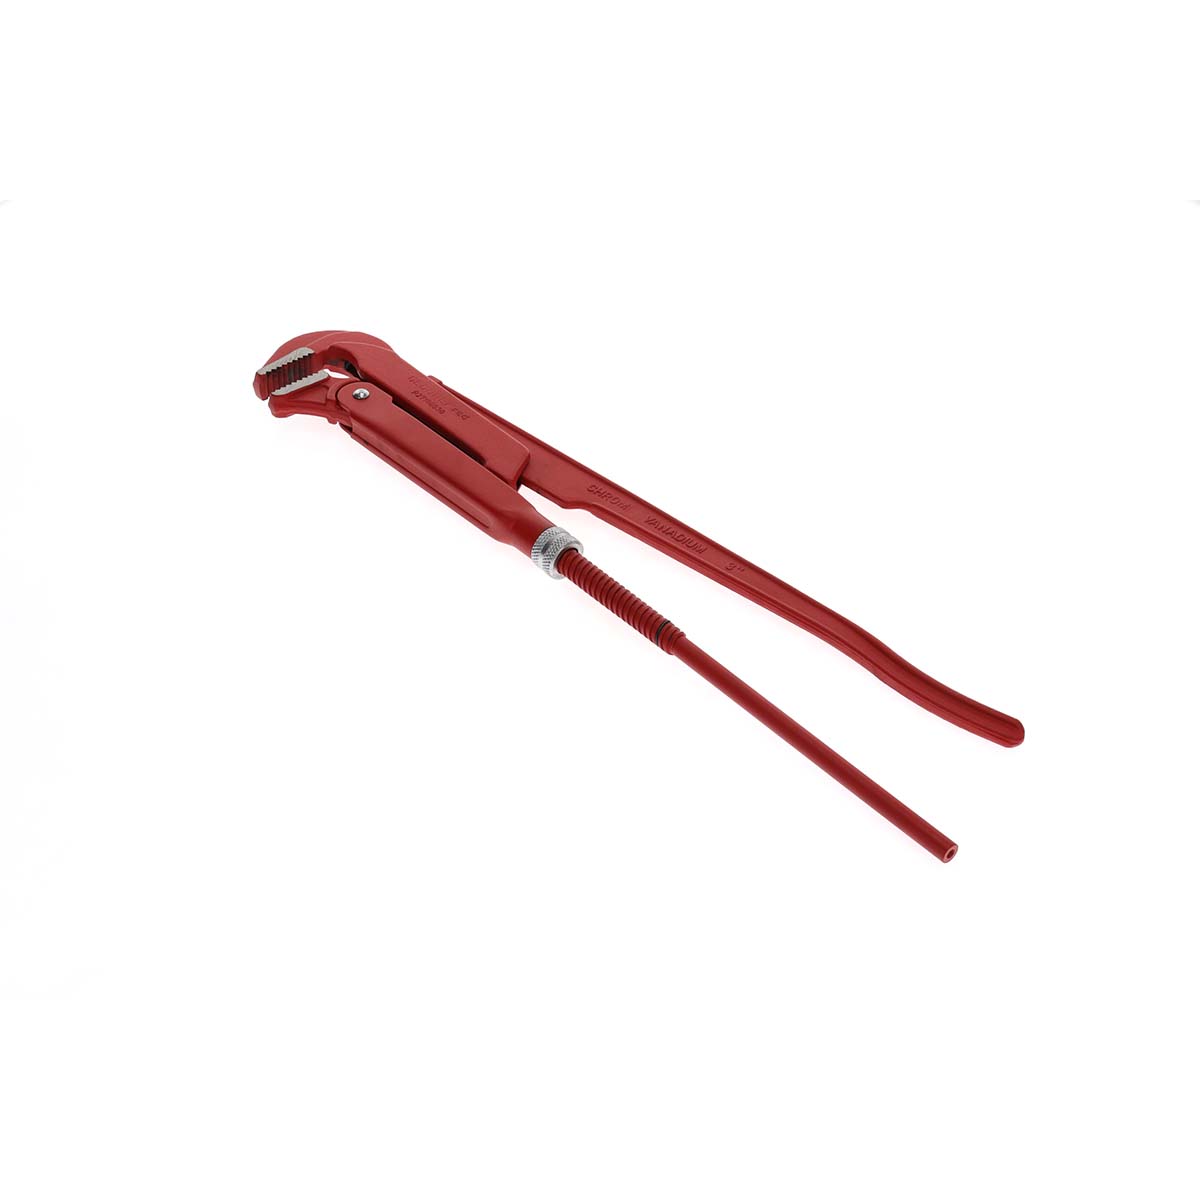 GEDORE red R27100030 - Pipe pliers 90°, Swedish model, 3 inches, L=635 mm (3301160)